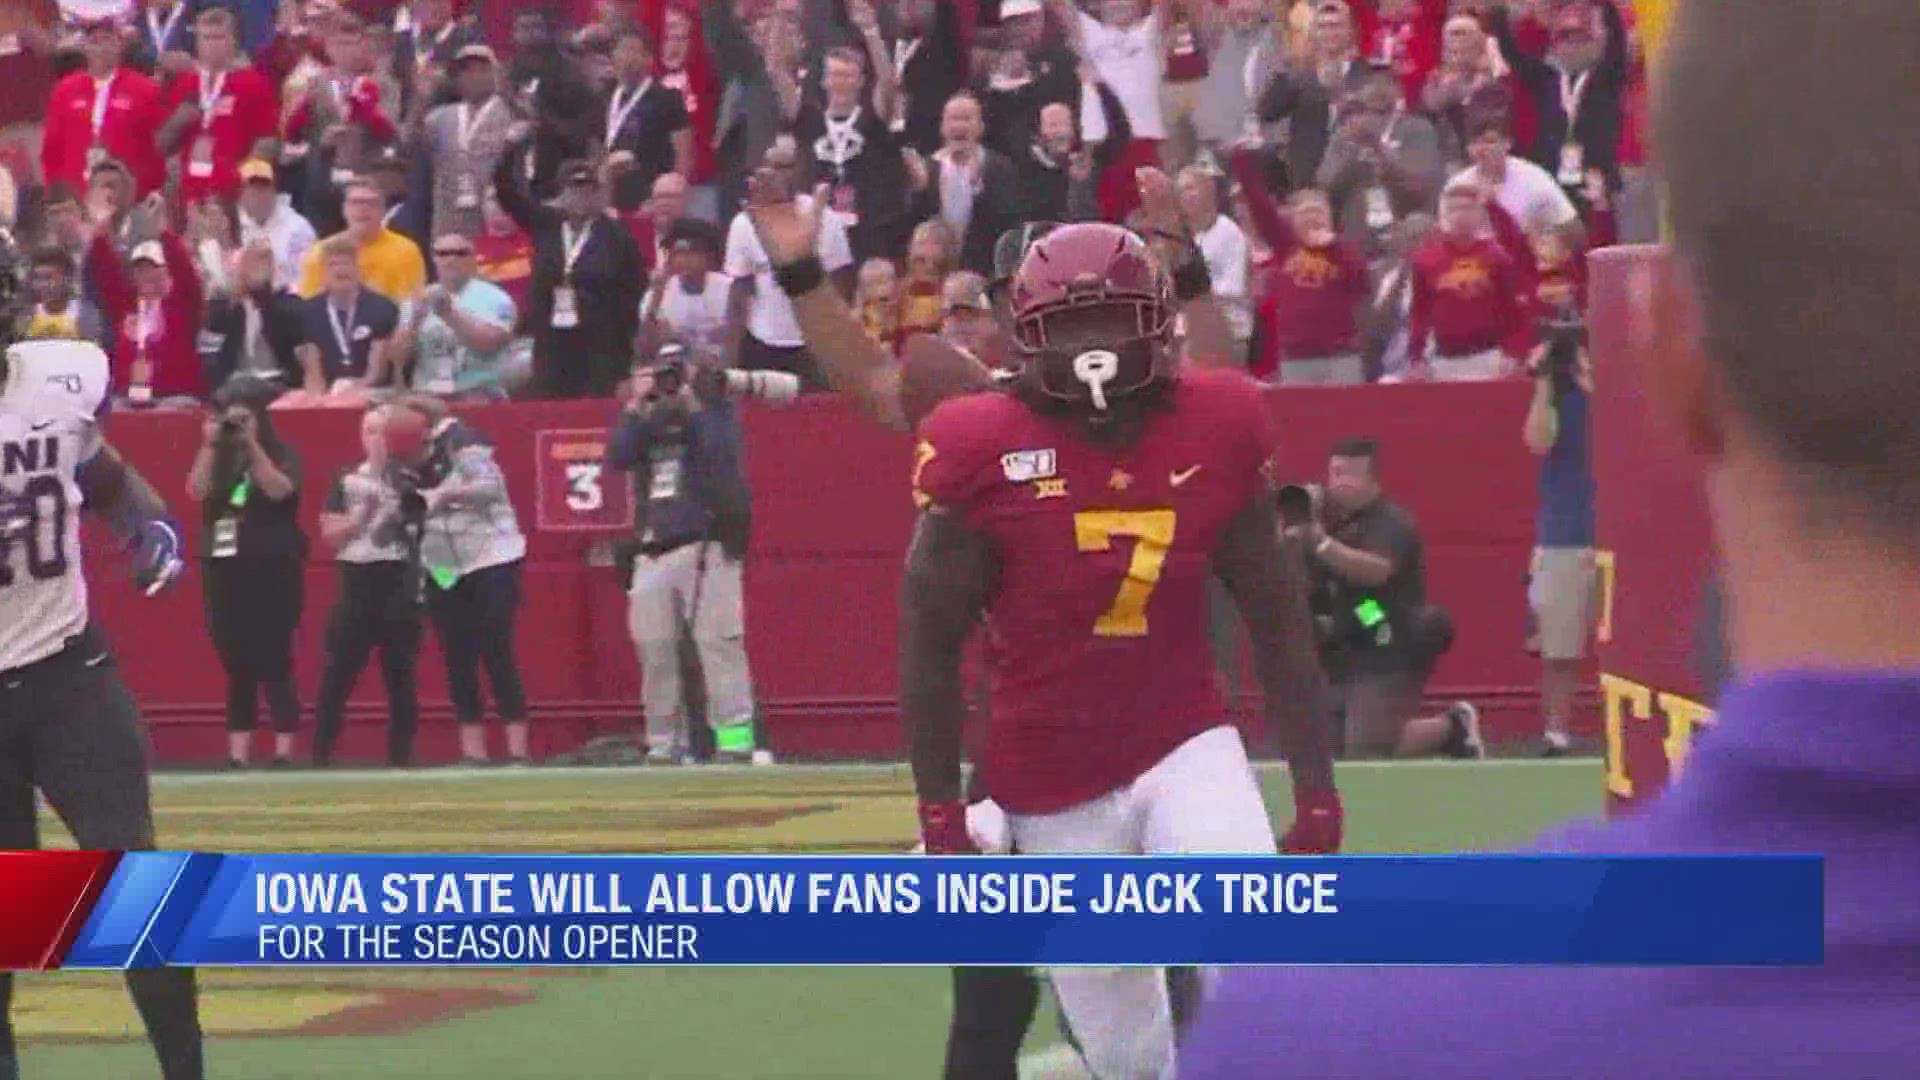 ISU Athletic Director Jamie Pollard says if fans can't follow mitigation efforts at the first game, no fans will be allowed to future games at Jack Trice Stadium.